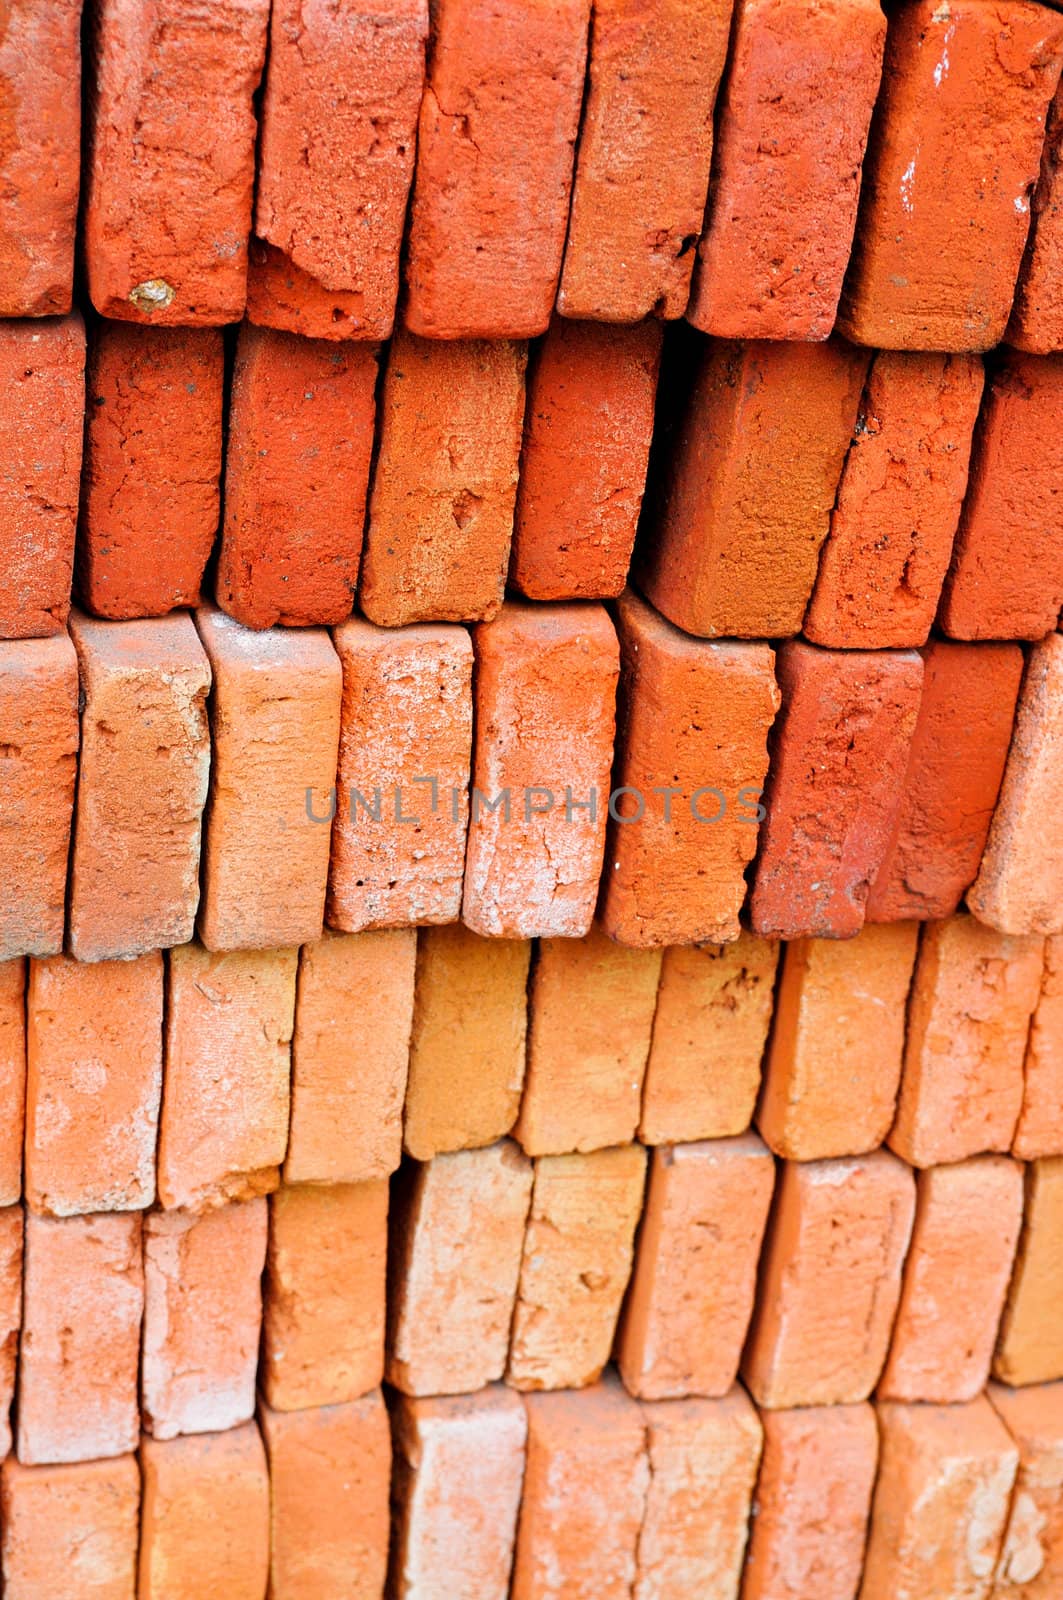 A beautifully stacked red and rust colored bricks.